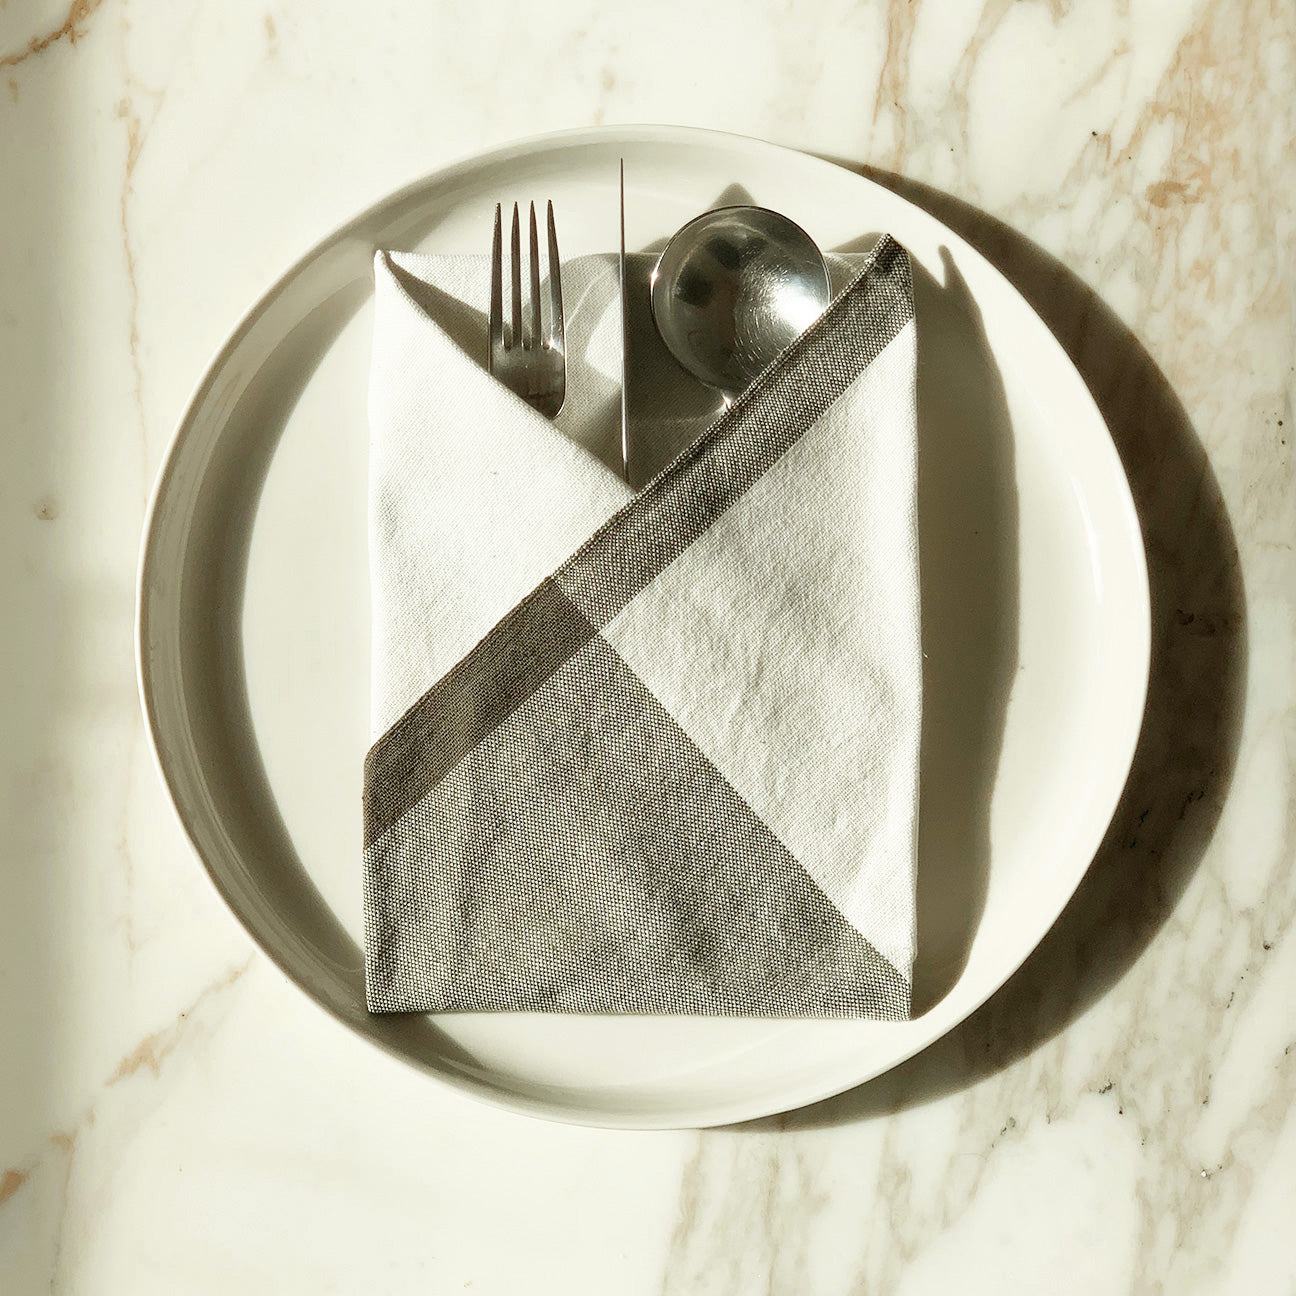 Image of M+A NYC Colorblock Napkin in Kora/Earth folded on a plate with cutlery nestled inside.